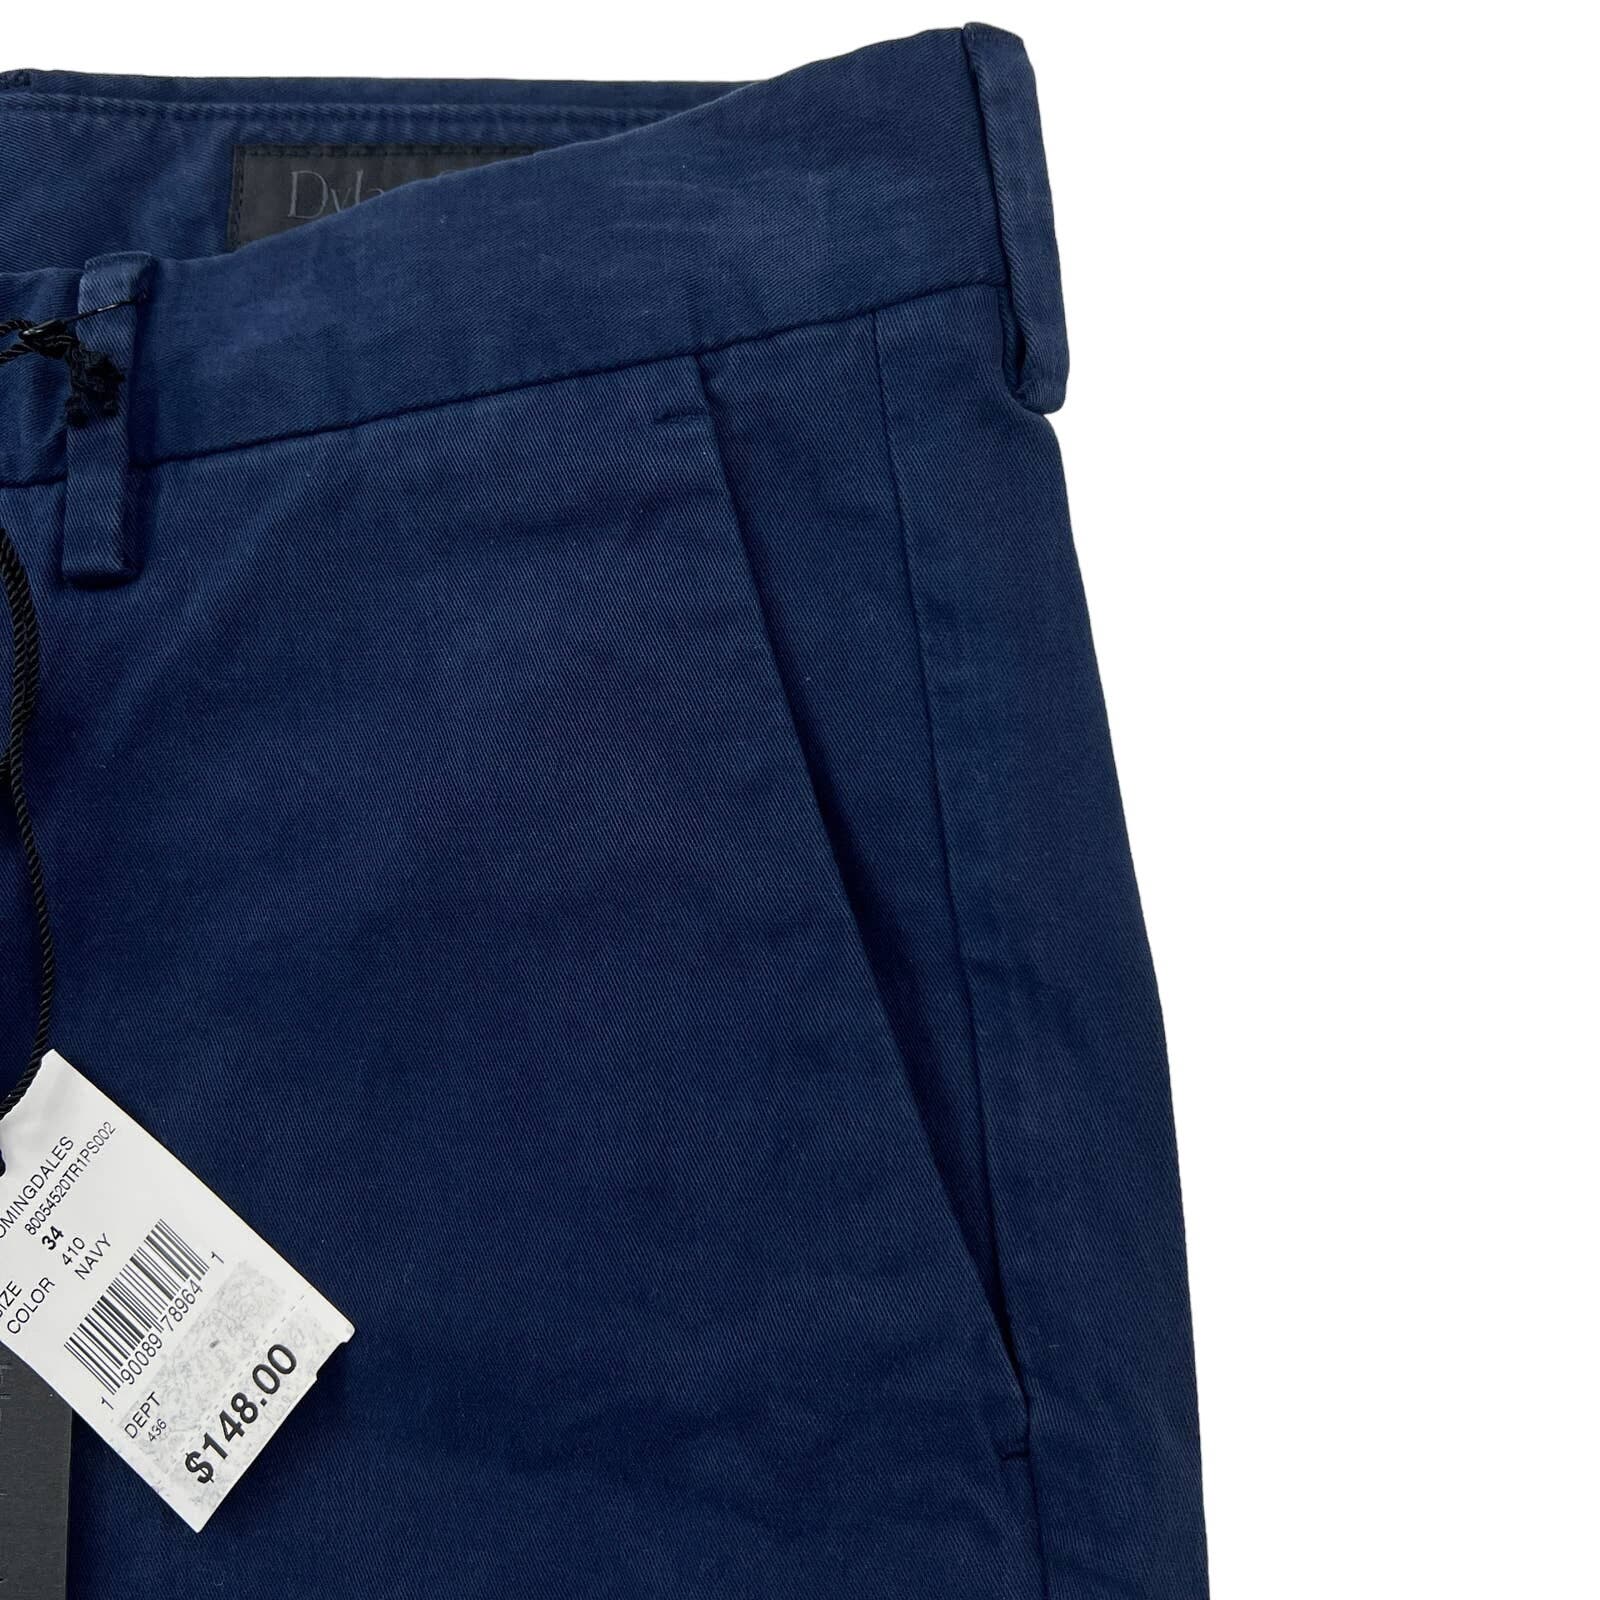 Dylan Gray Men Navy Blue Chinos Pants US 34 Classic Straight